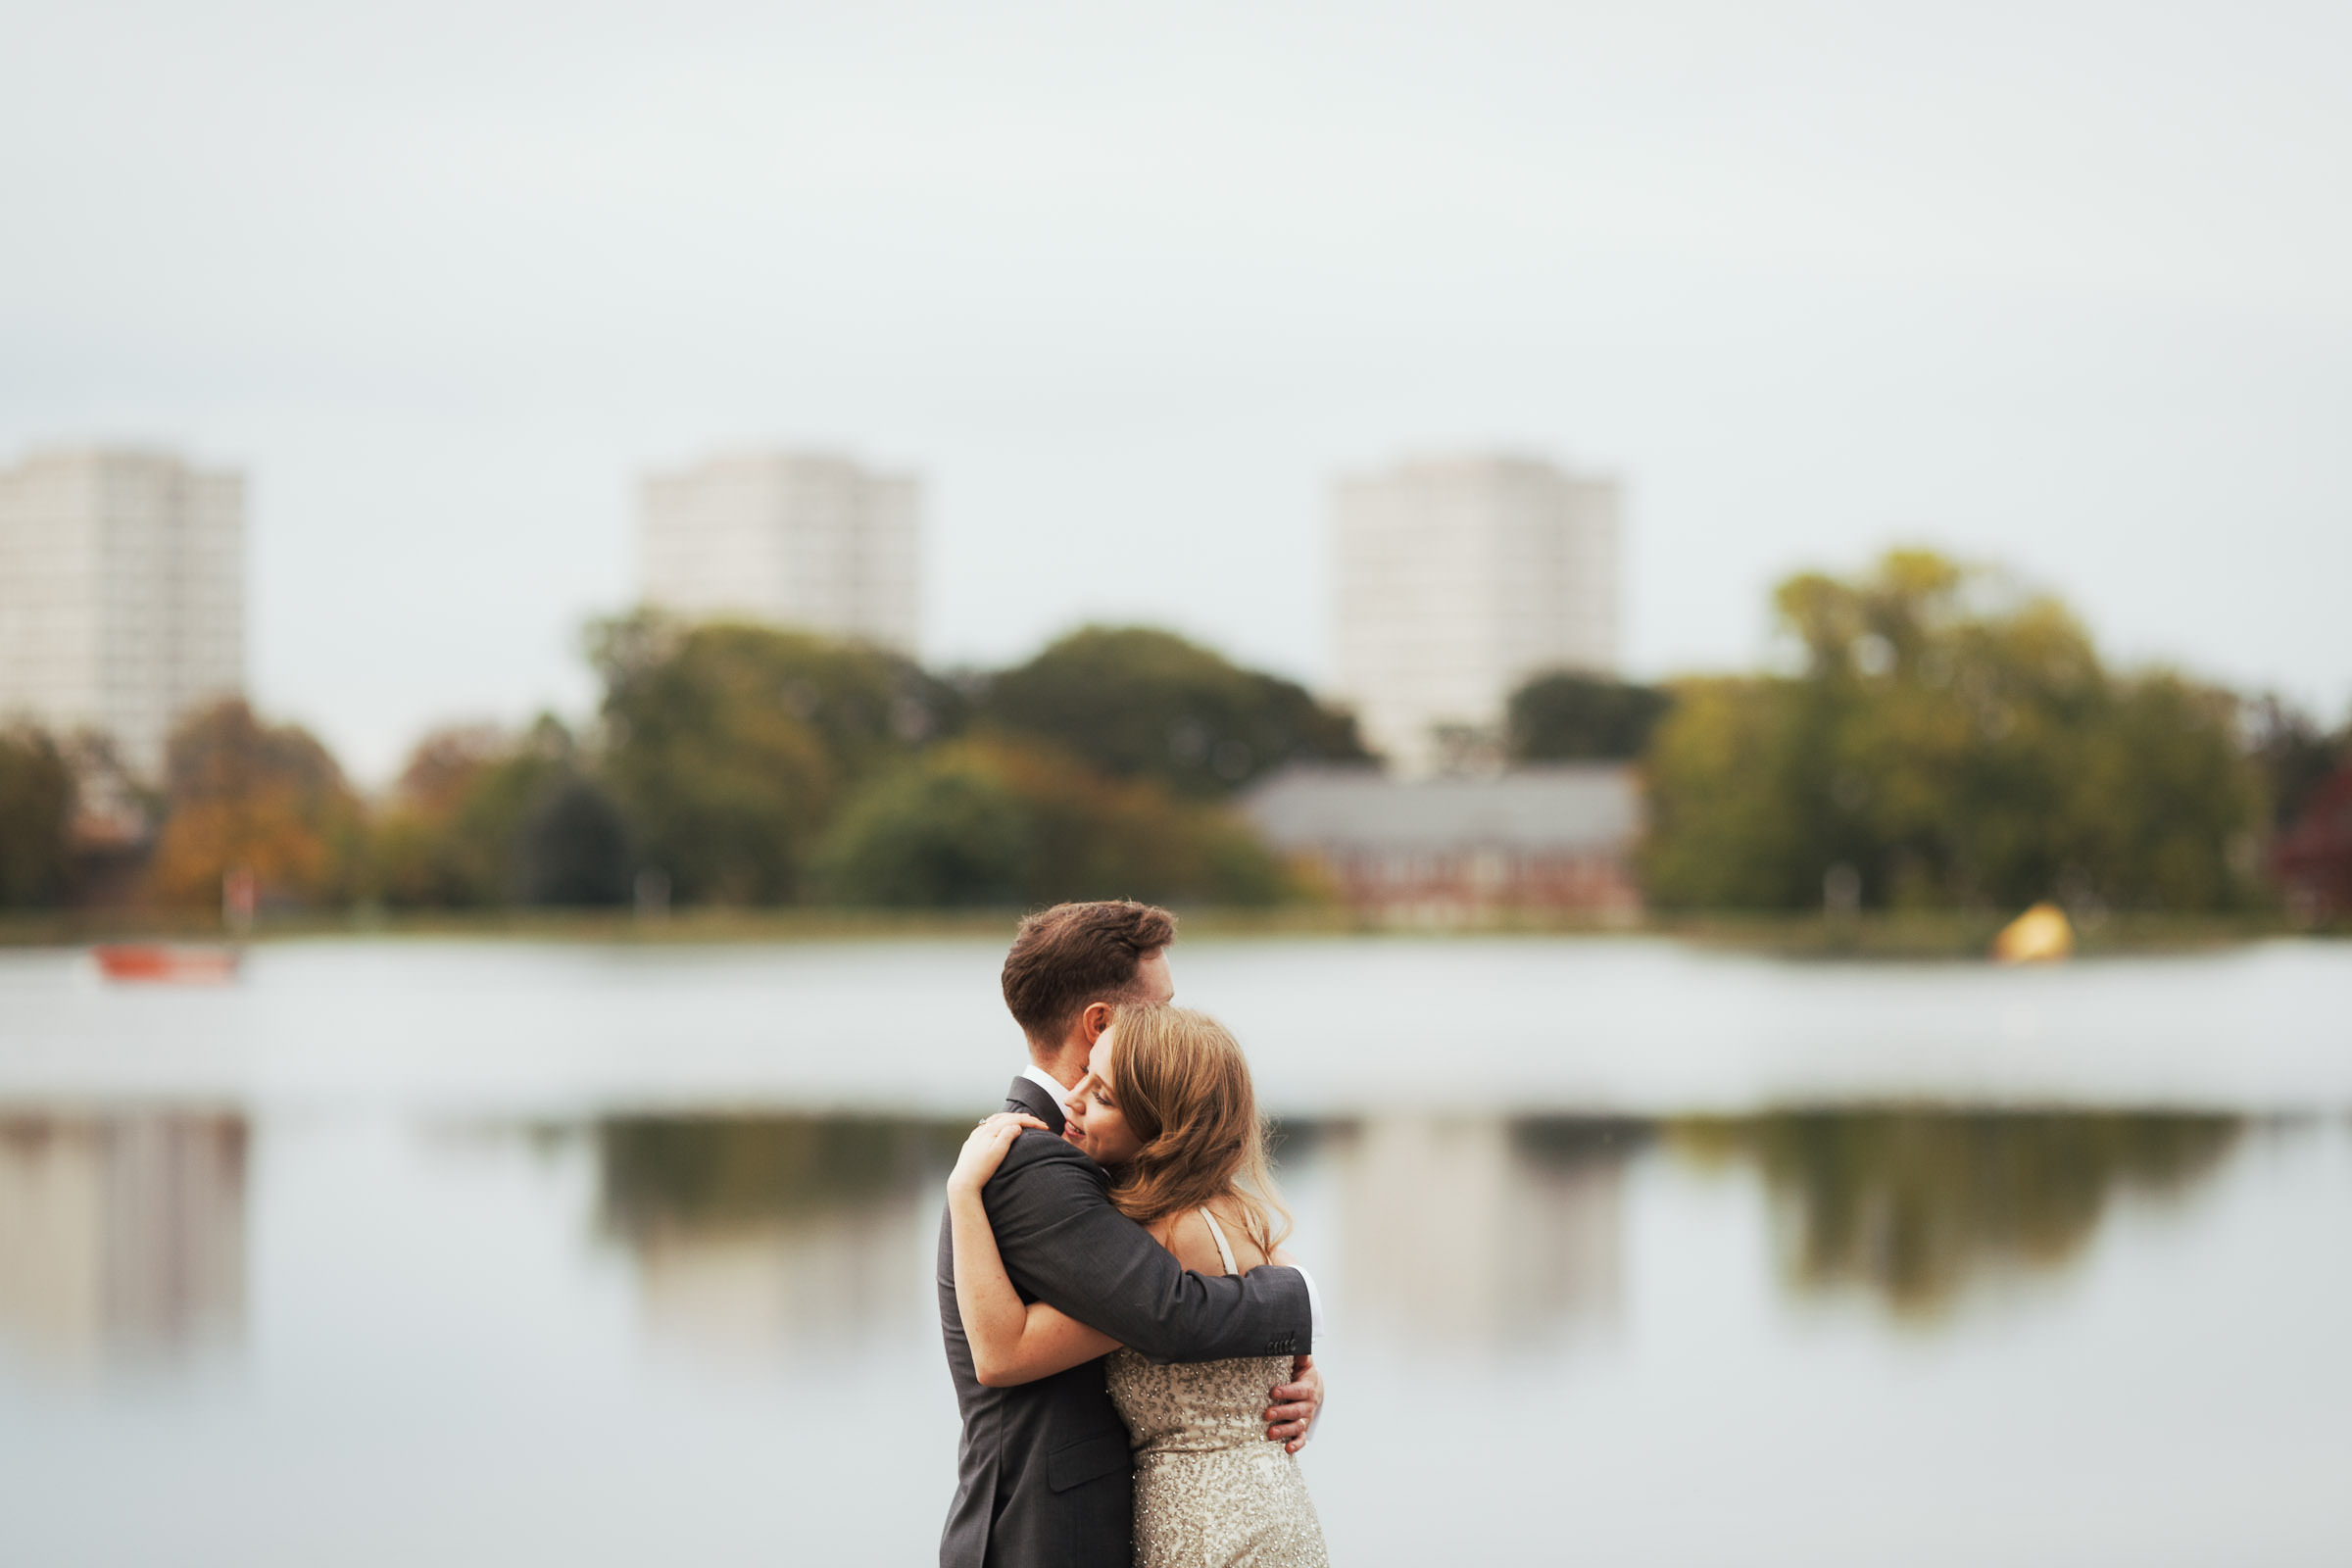 Newly married couple hugging by the lake at the West Reservoir Centre in Stoke Newington. the City View Apartments, Devan Grove, N4 in the background. Bride has long hair and is wearing a champagne coloured dress.